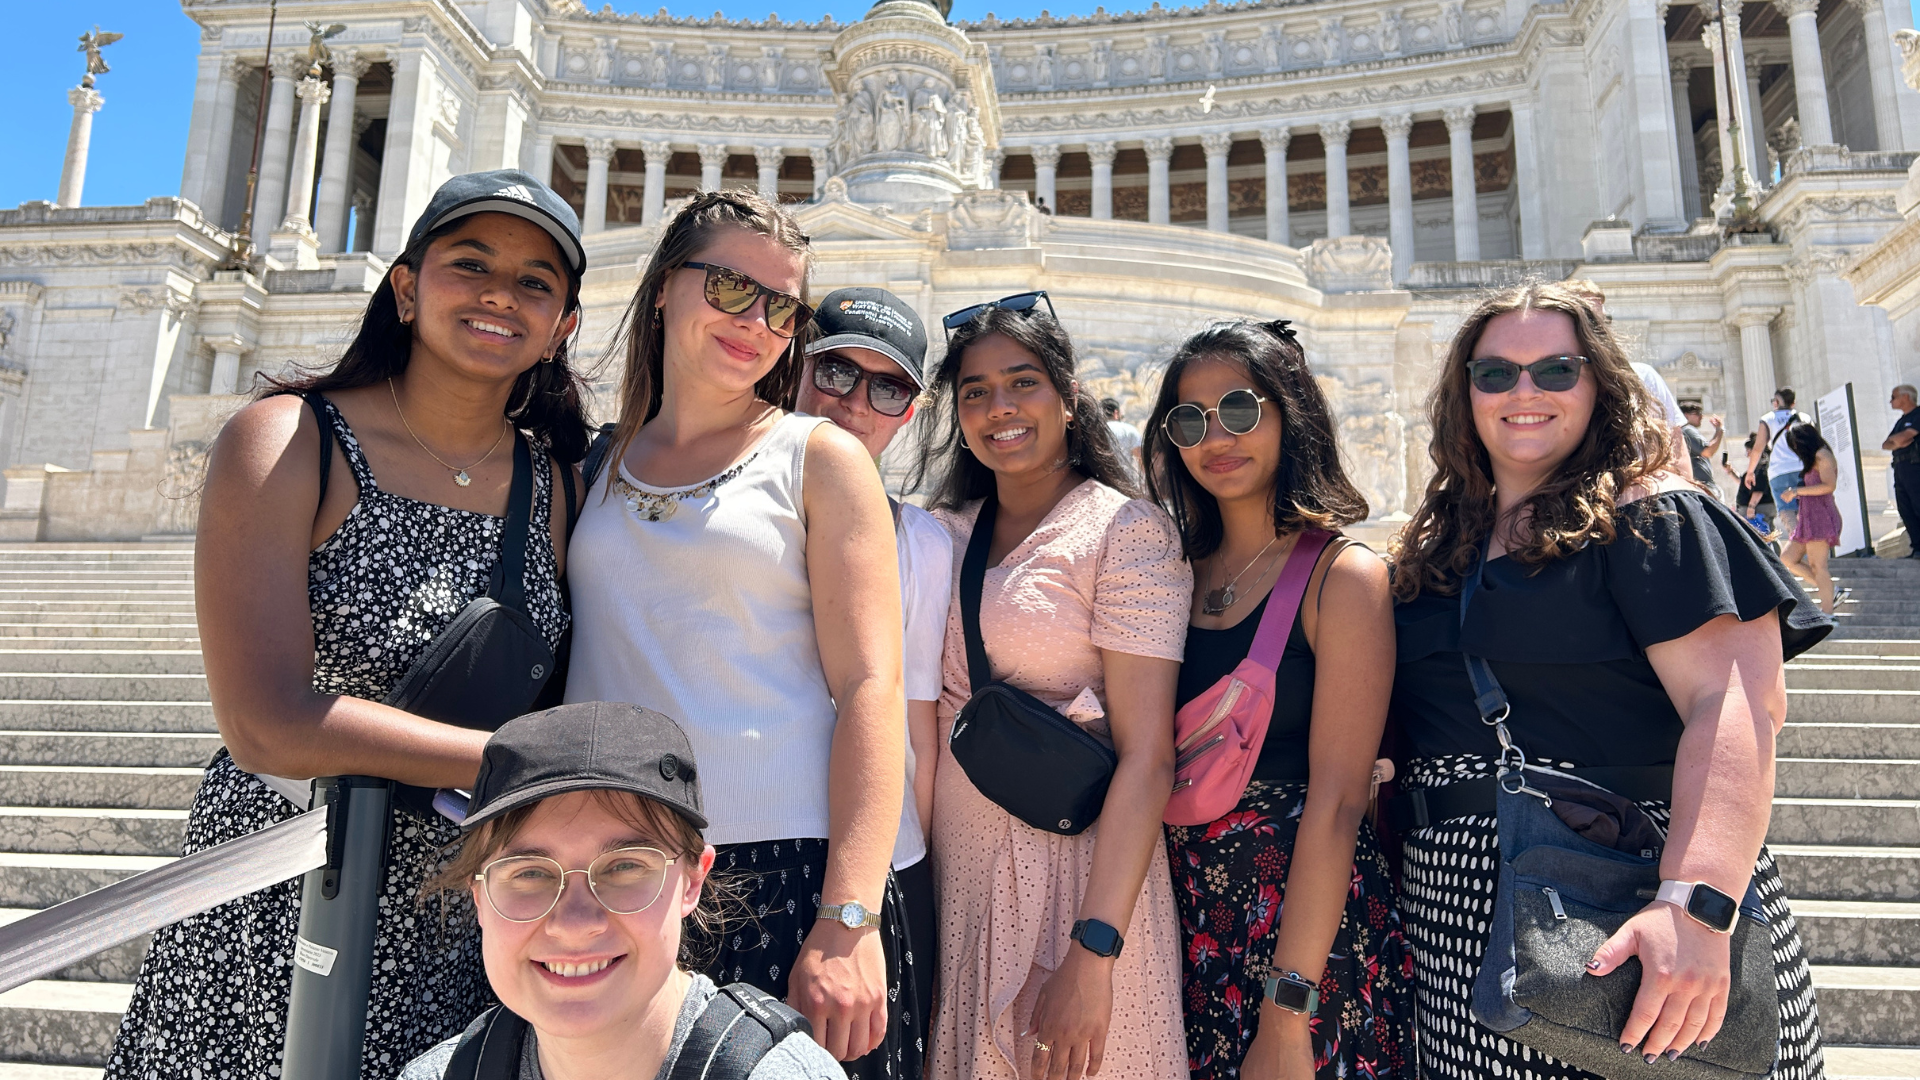 Seven students standing on the steps in front of Altare della Patria in Rome.